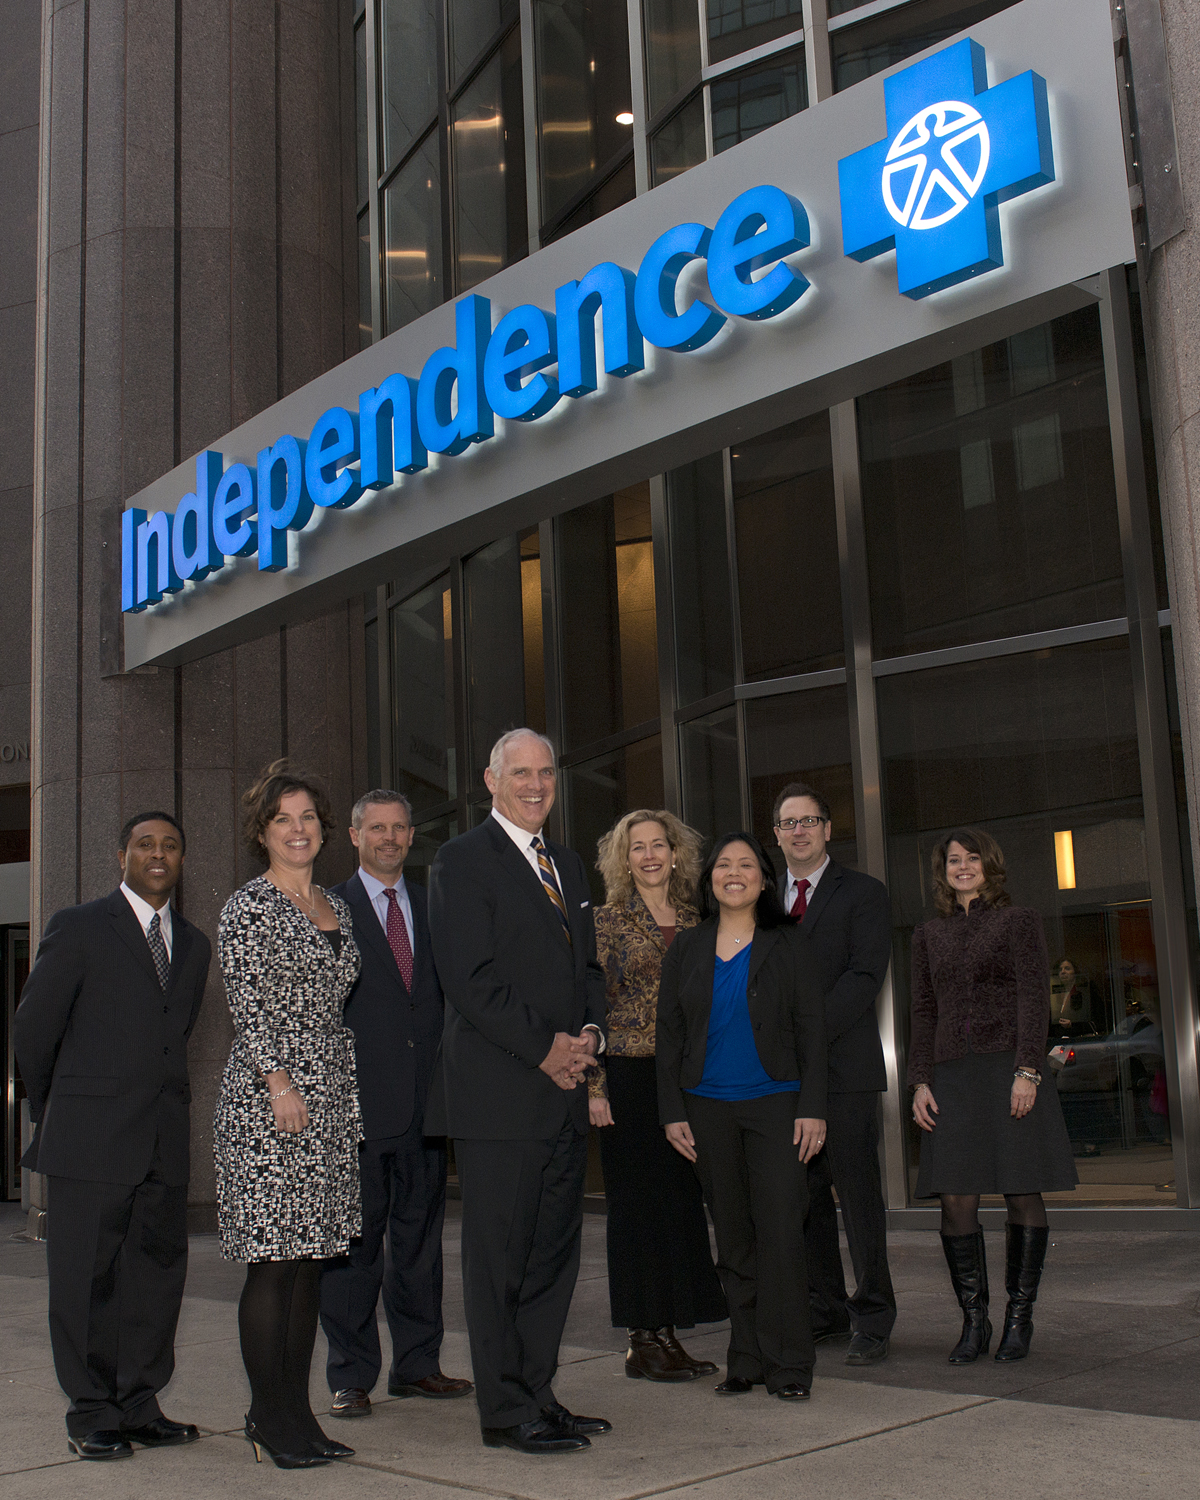 Independence Blue Cross new building signage 